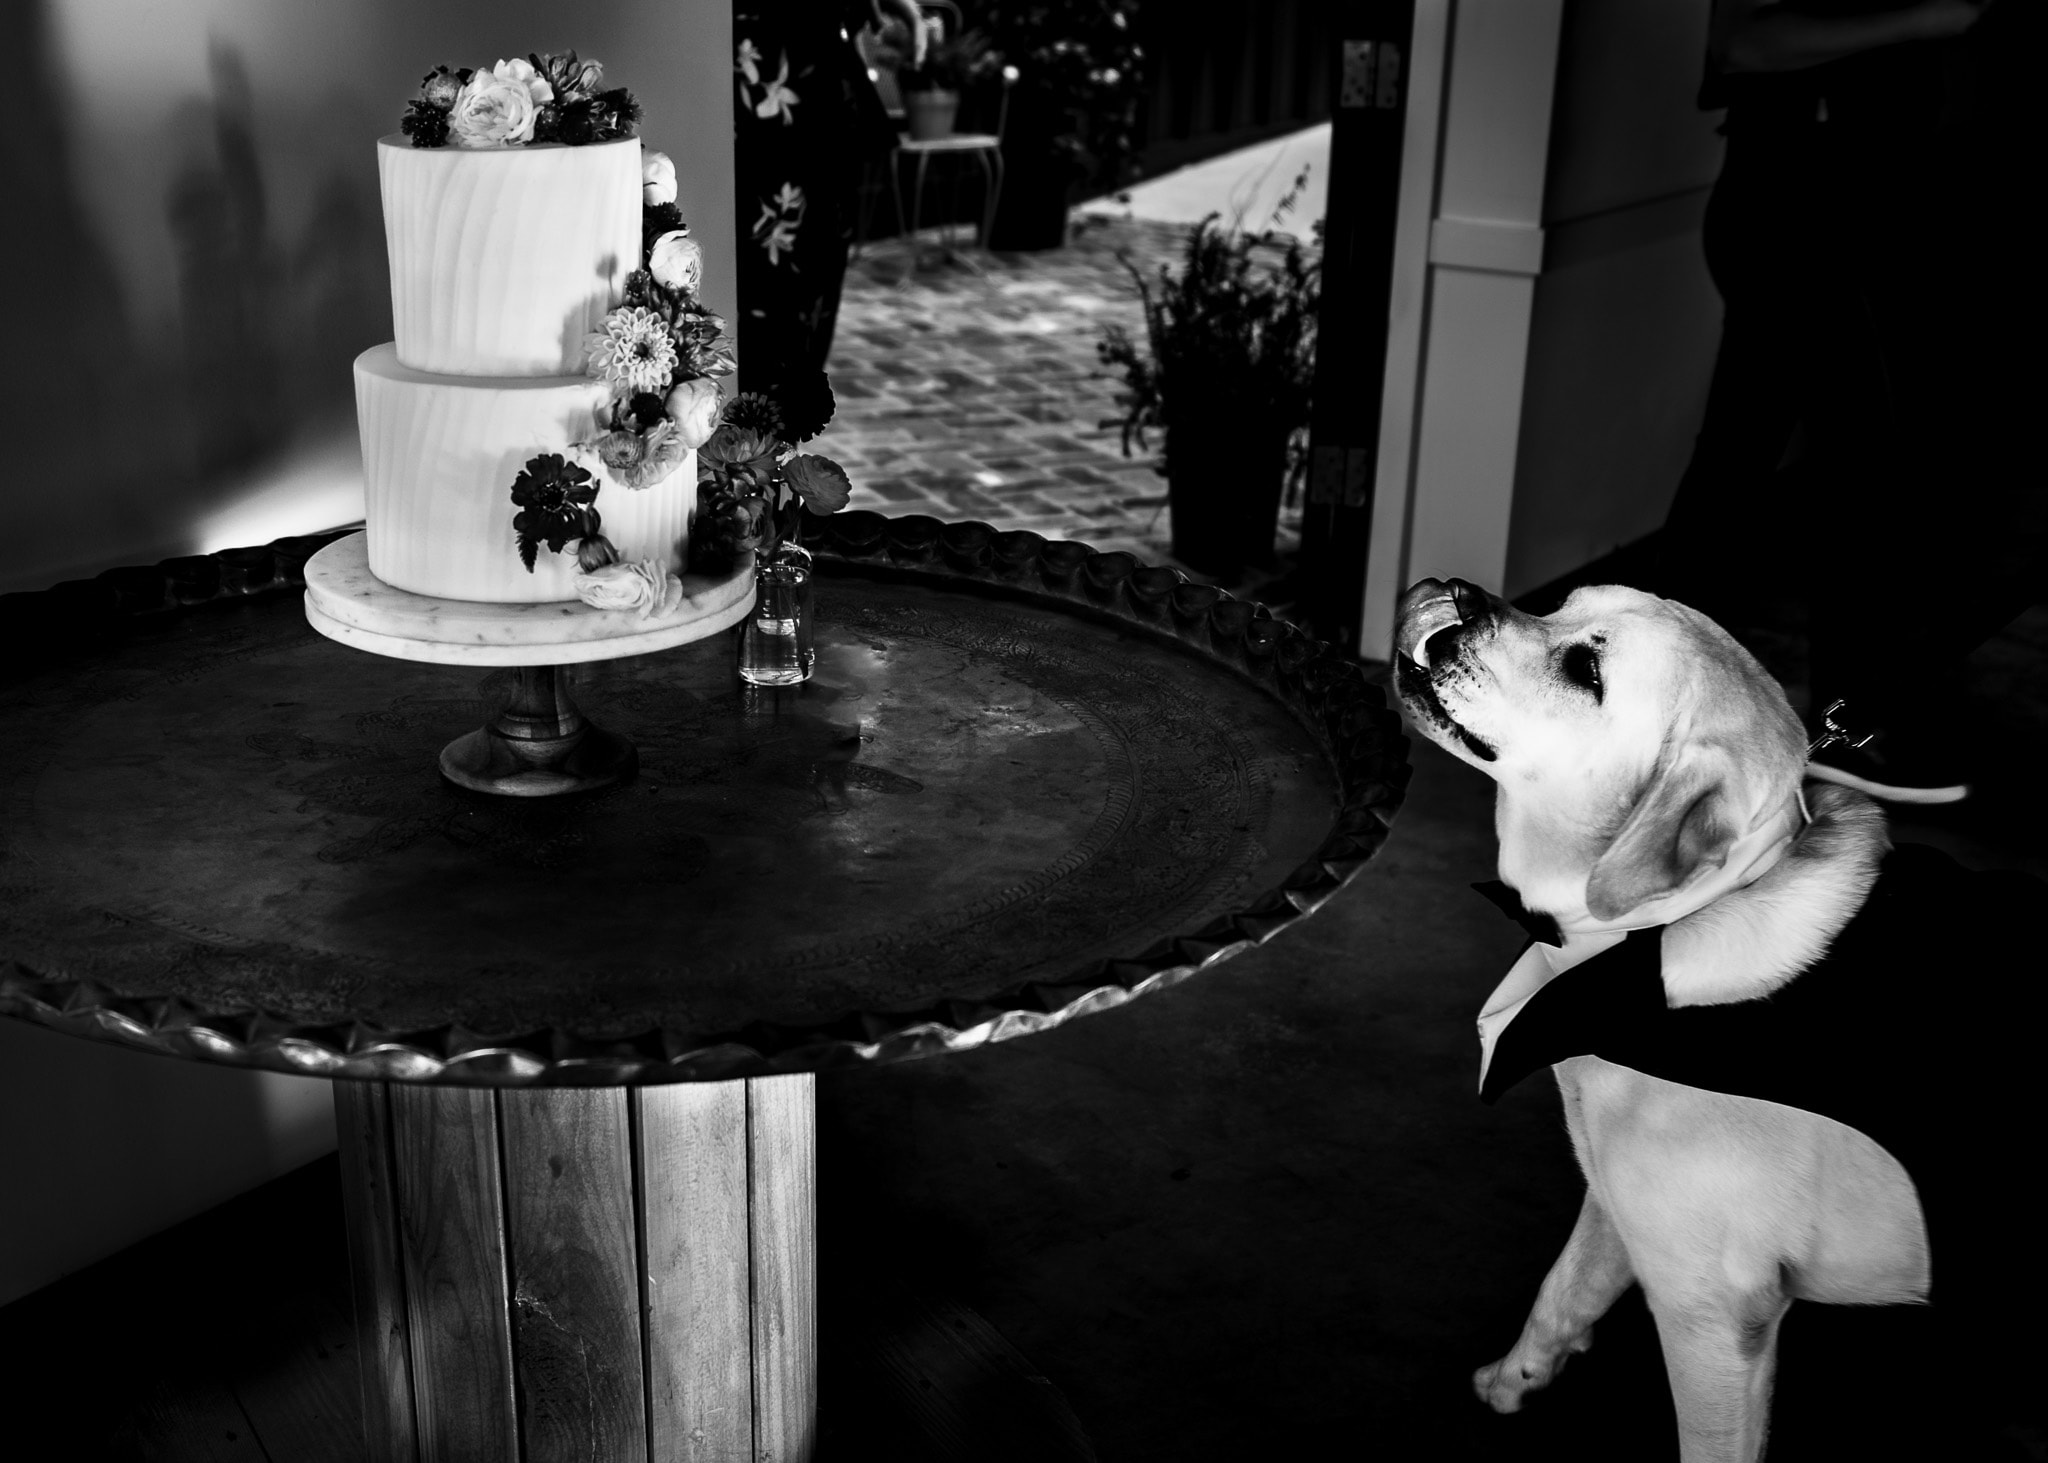 dog in a tuxedo costume licks his chops as he looks at a wedding cake | photo by Kivus and Camera